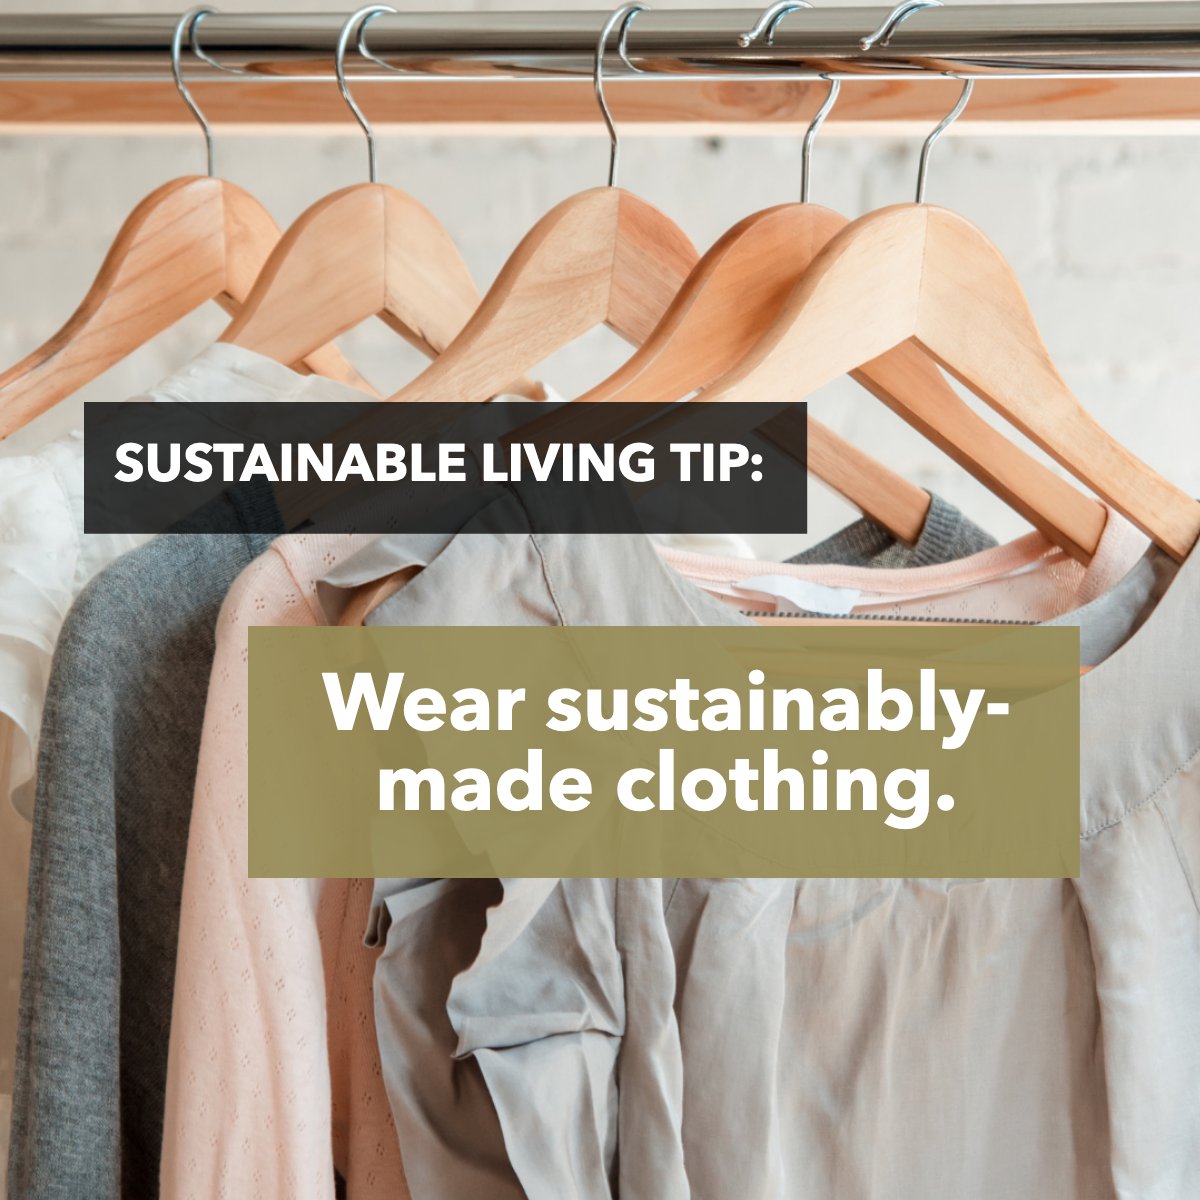 💚 Sustainable fashion 👕 is a design philosophy and movement that promotes environmental and social responsibility! 🌳

Are you part of this movement yet? 💪

#sustainable #fashion #clothes #thinkgreen
 #hotharfordhomesforsale #findyourdreamhomenow